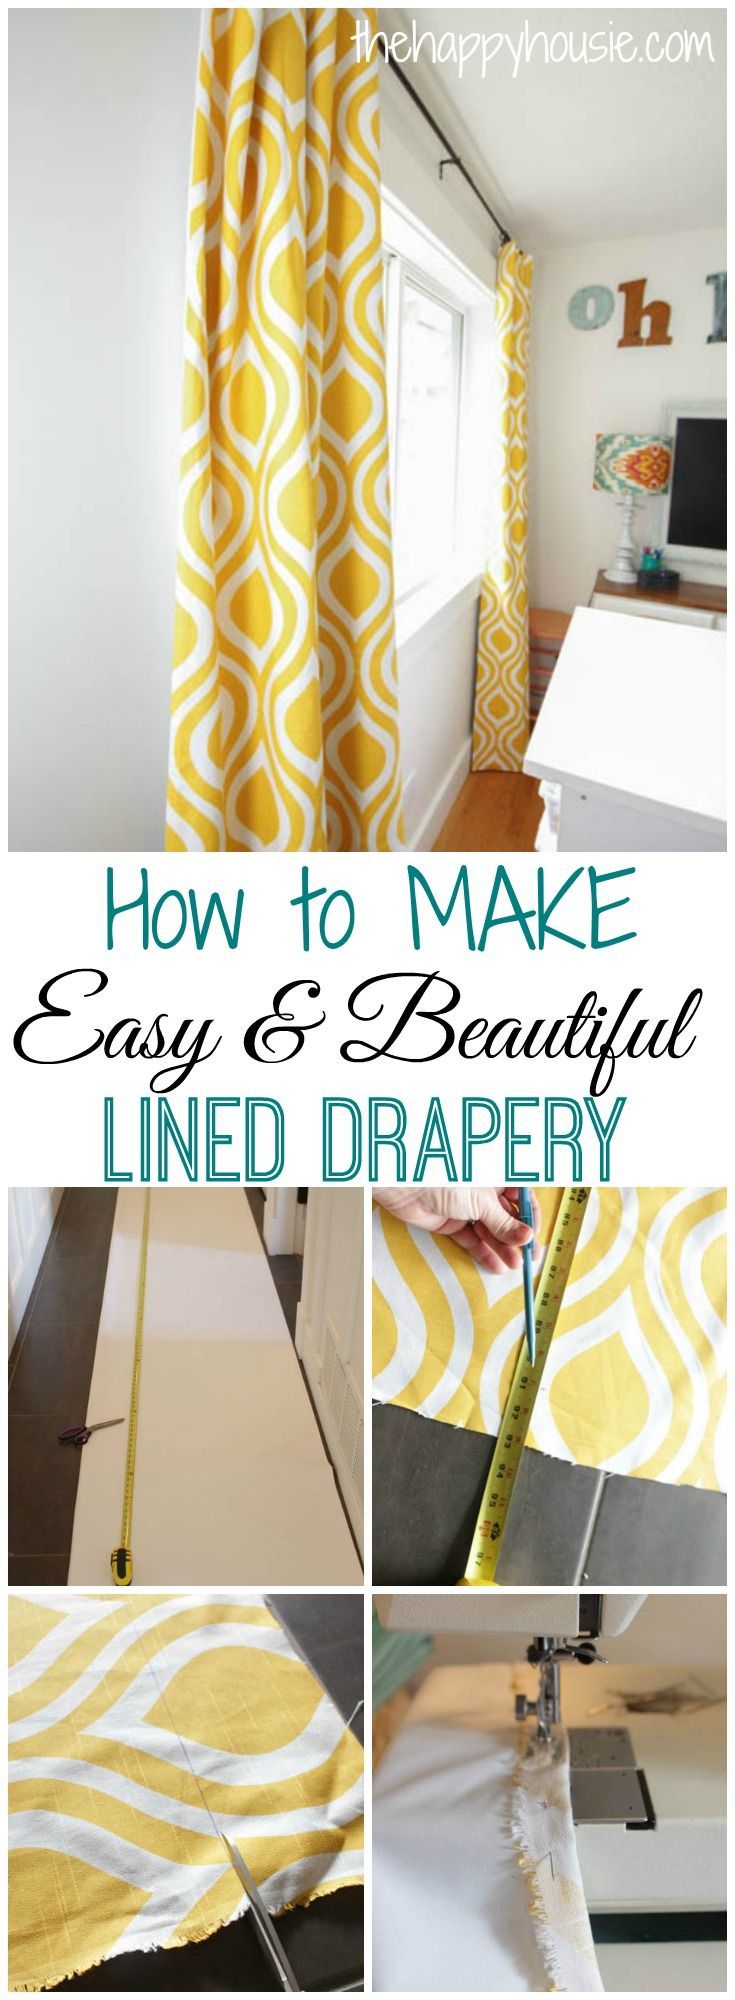 How to make your own easy and beautiful lined drapery even if you aren’t a master seamstress at thehappyhousie.com